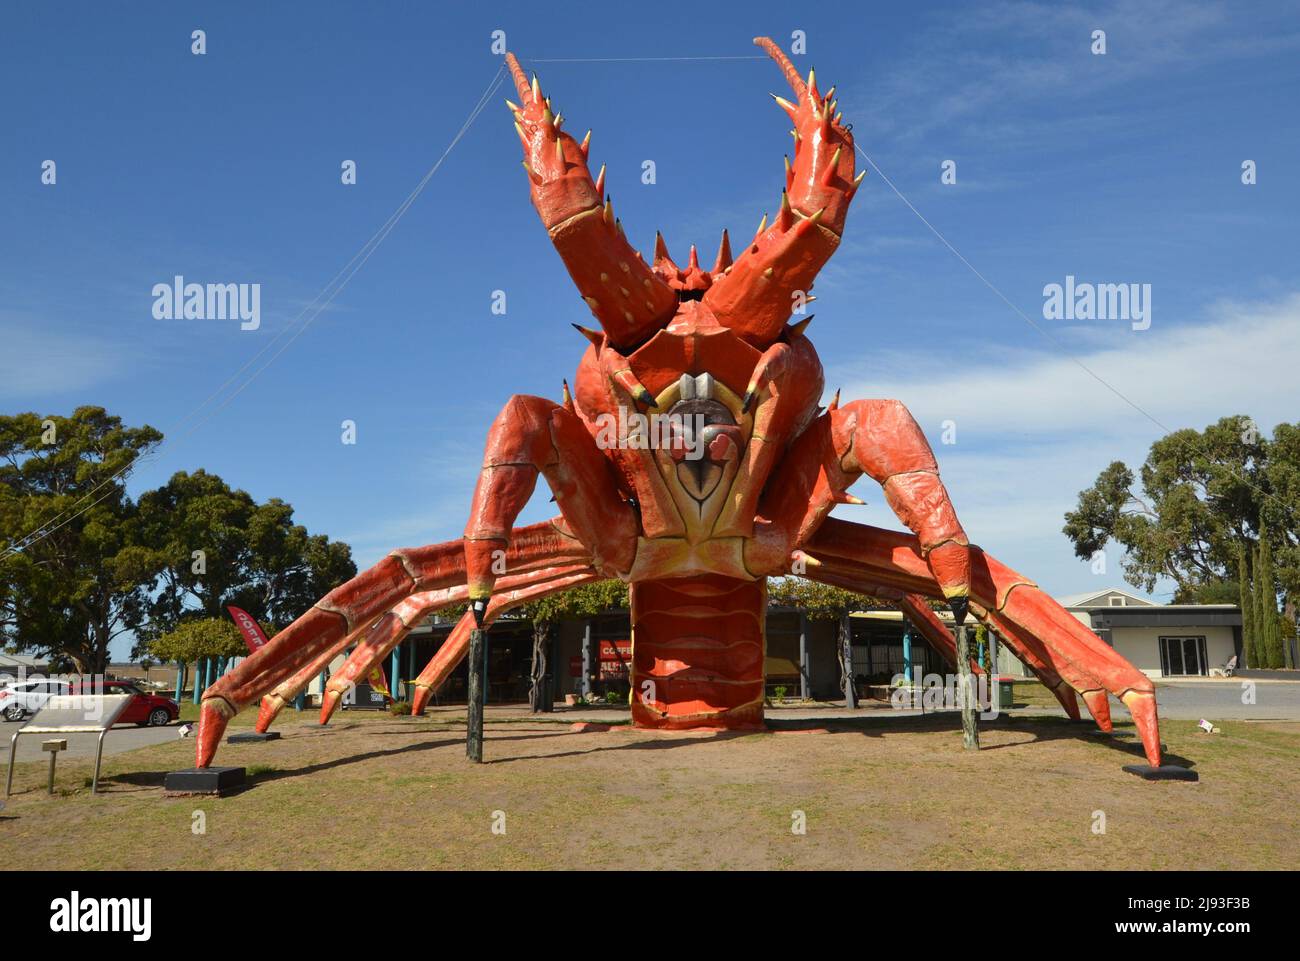 This very large concrete painted lobster is called Larry and is a very famous landmark in the South Australia town of Kingston, promoting seafood Stock Photo